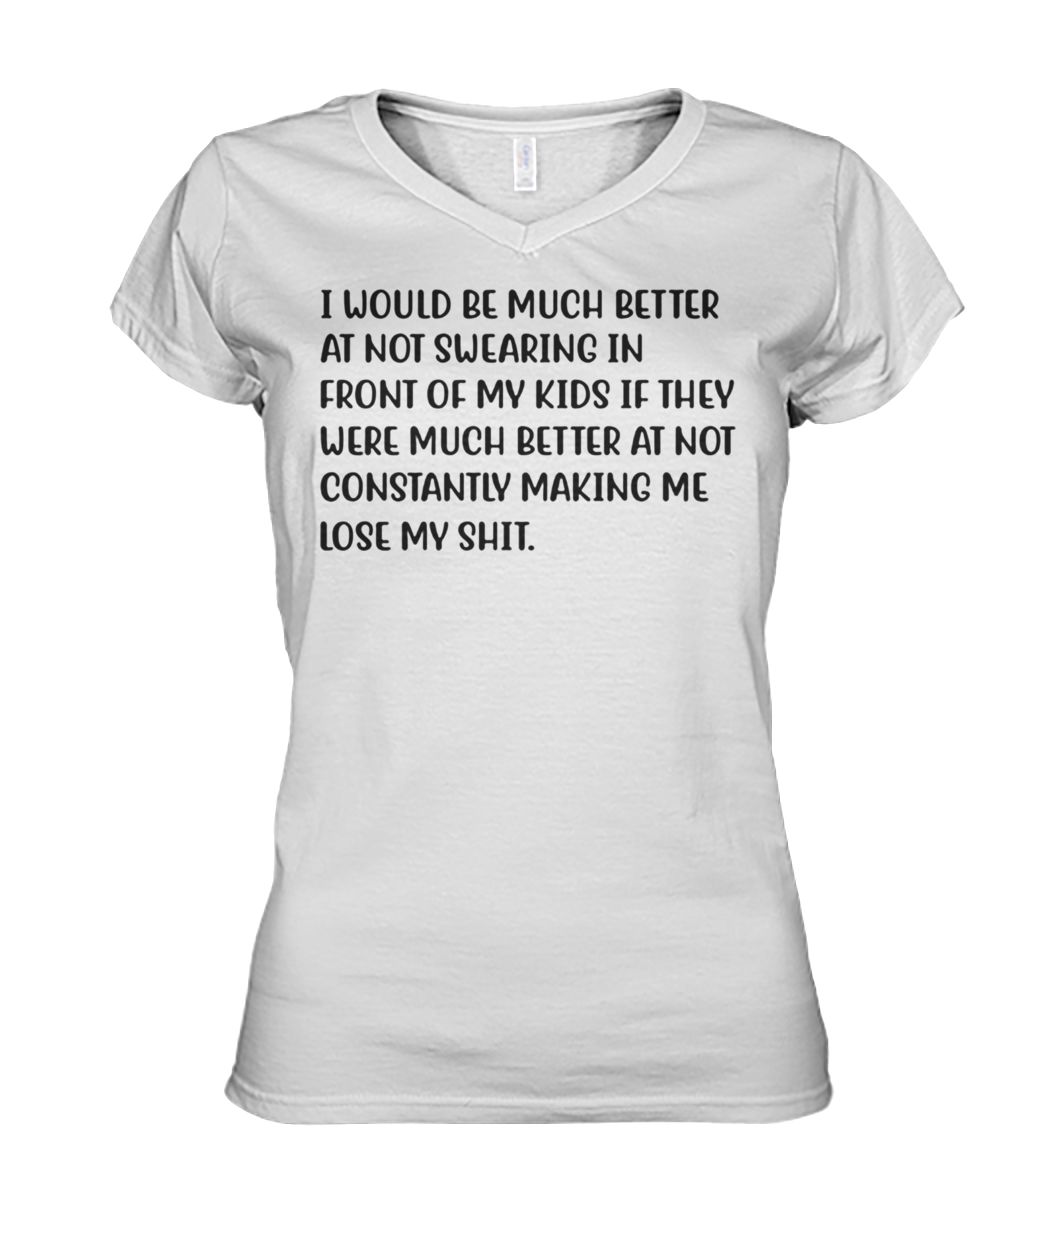 I would be much better at not swearing in front of my kids women's v-neck